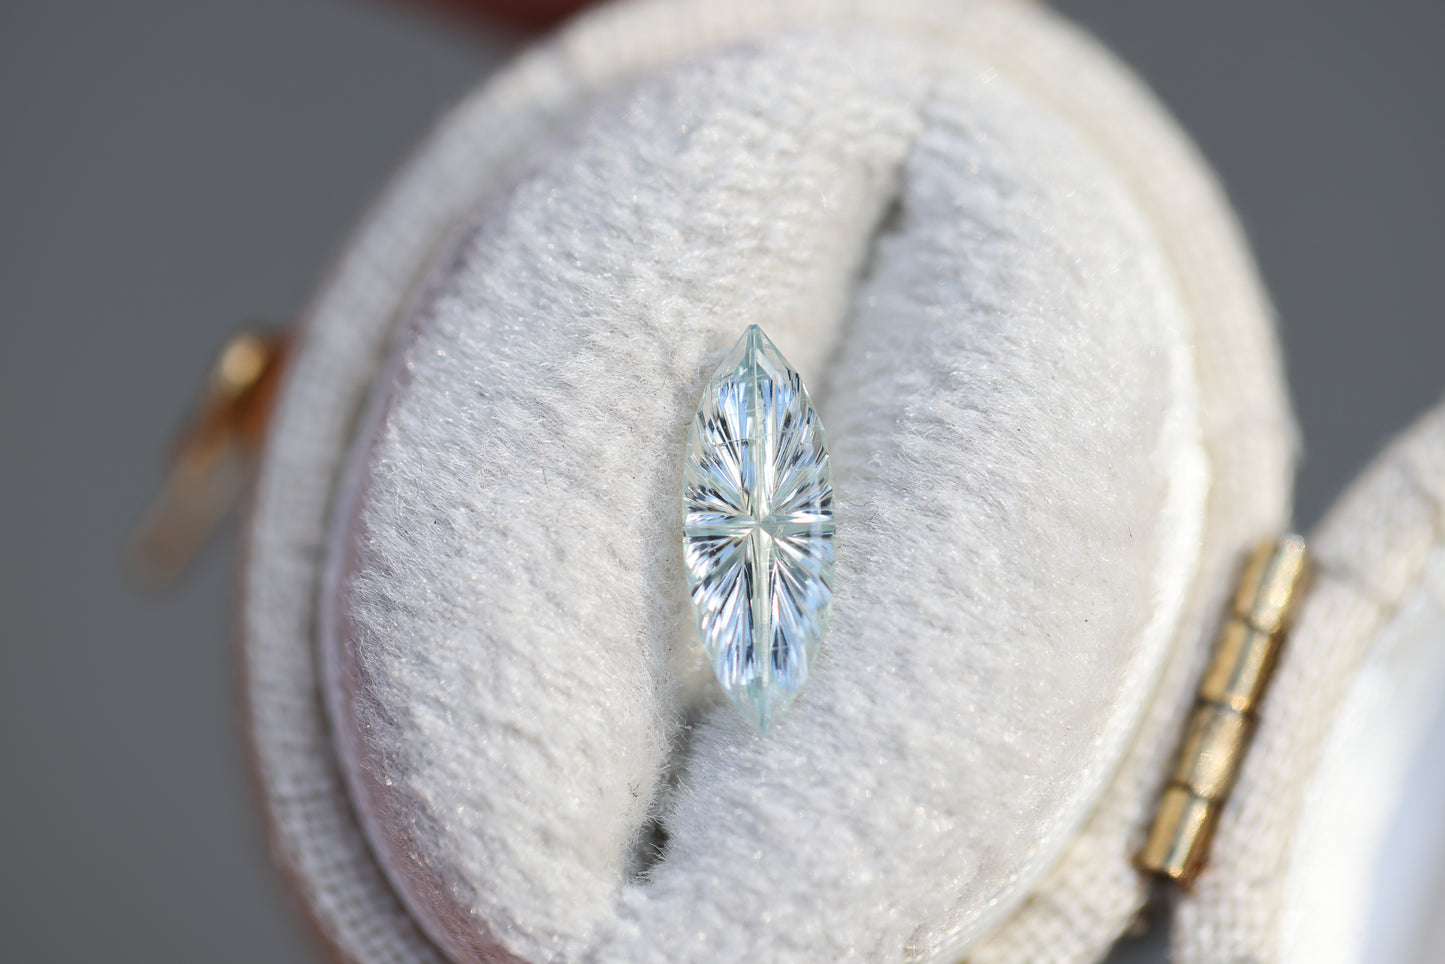 .7ct marquise white hint of blue sapphire - Starbrite cut by John Dyer